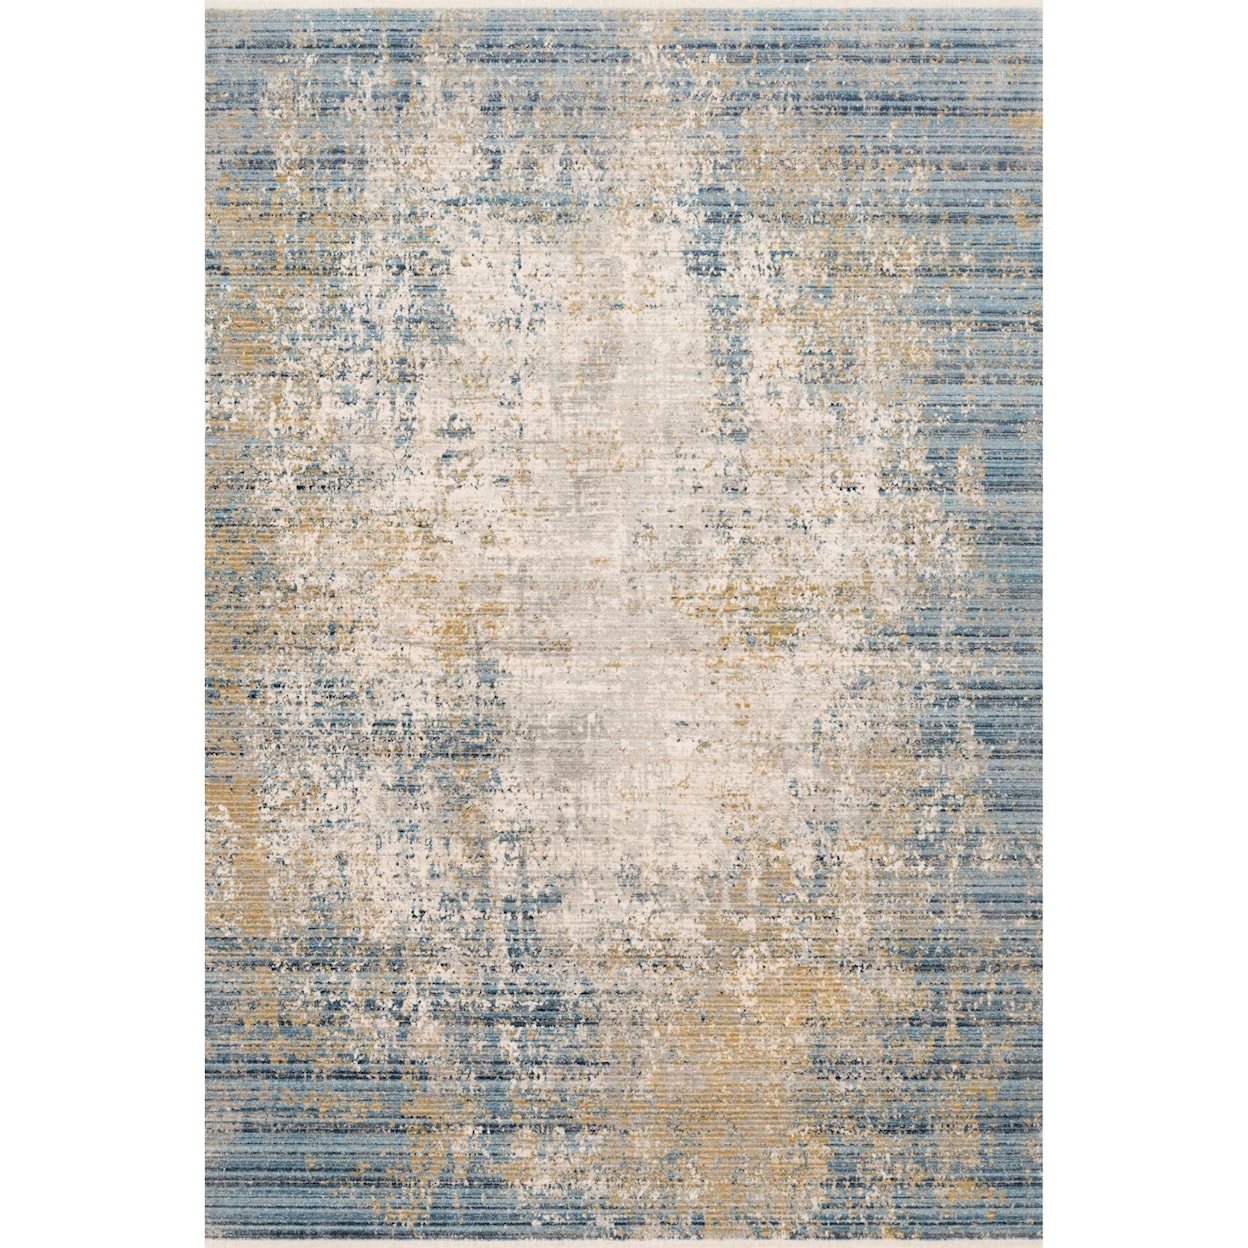 Reeds Rugs Claire 5'3" x 7'9" Neutral / Sea Rug